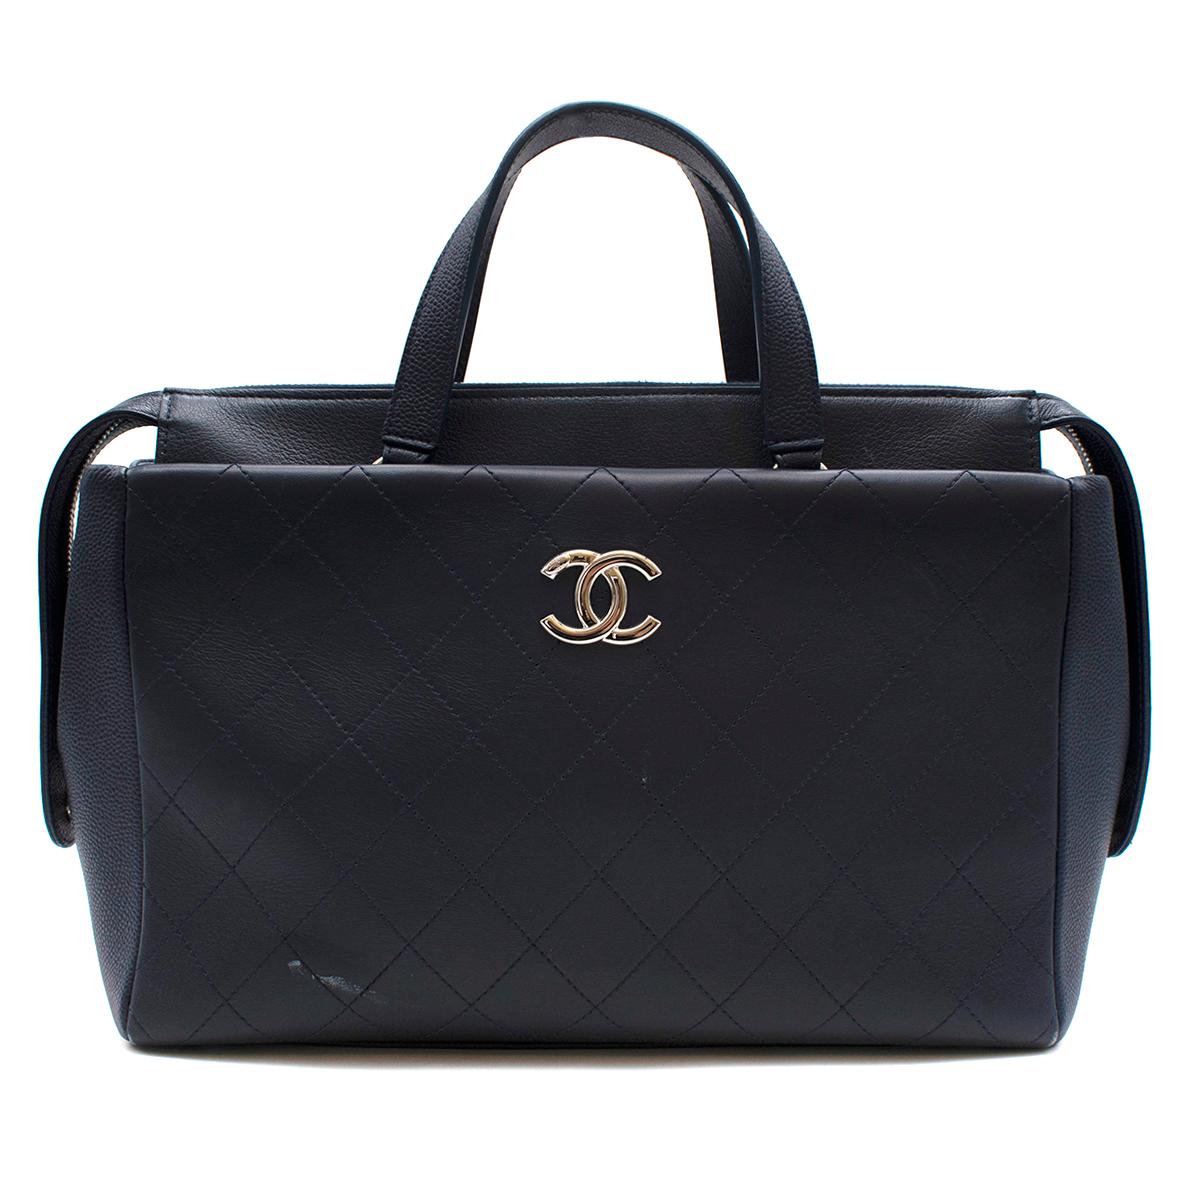 Chanel Blue Lambskin & Caviar Calfskin CC Top Handle Shopper

- Legendary CC logo 
- Silver-tone hardware 
- Top handles 
- Zip fastening to the top 
- It comes with a leather shoulder strap that sits easily on the shoulders
- Pockets to the front